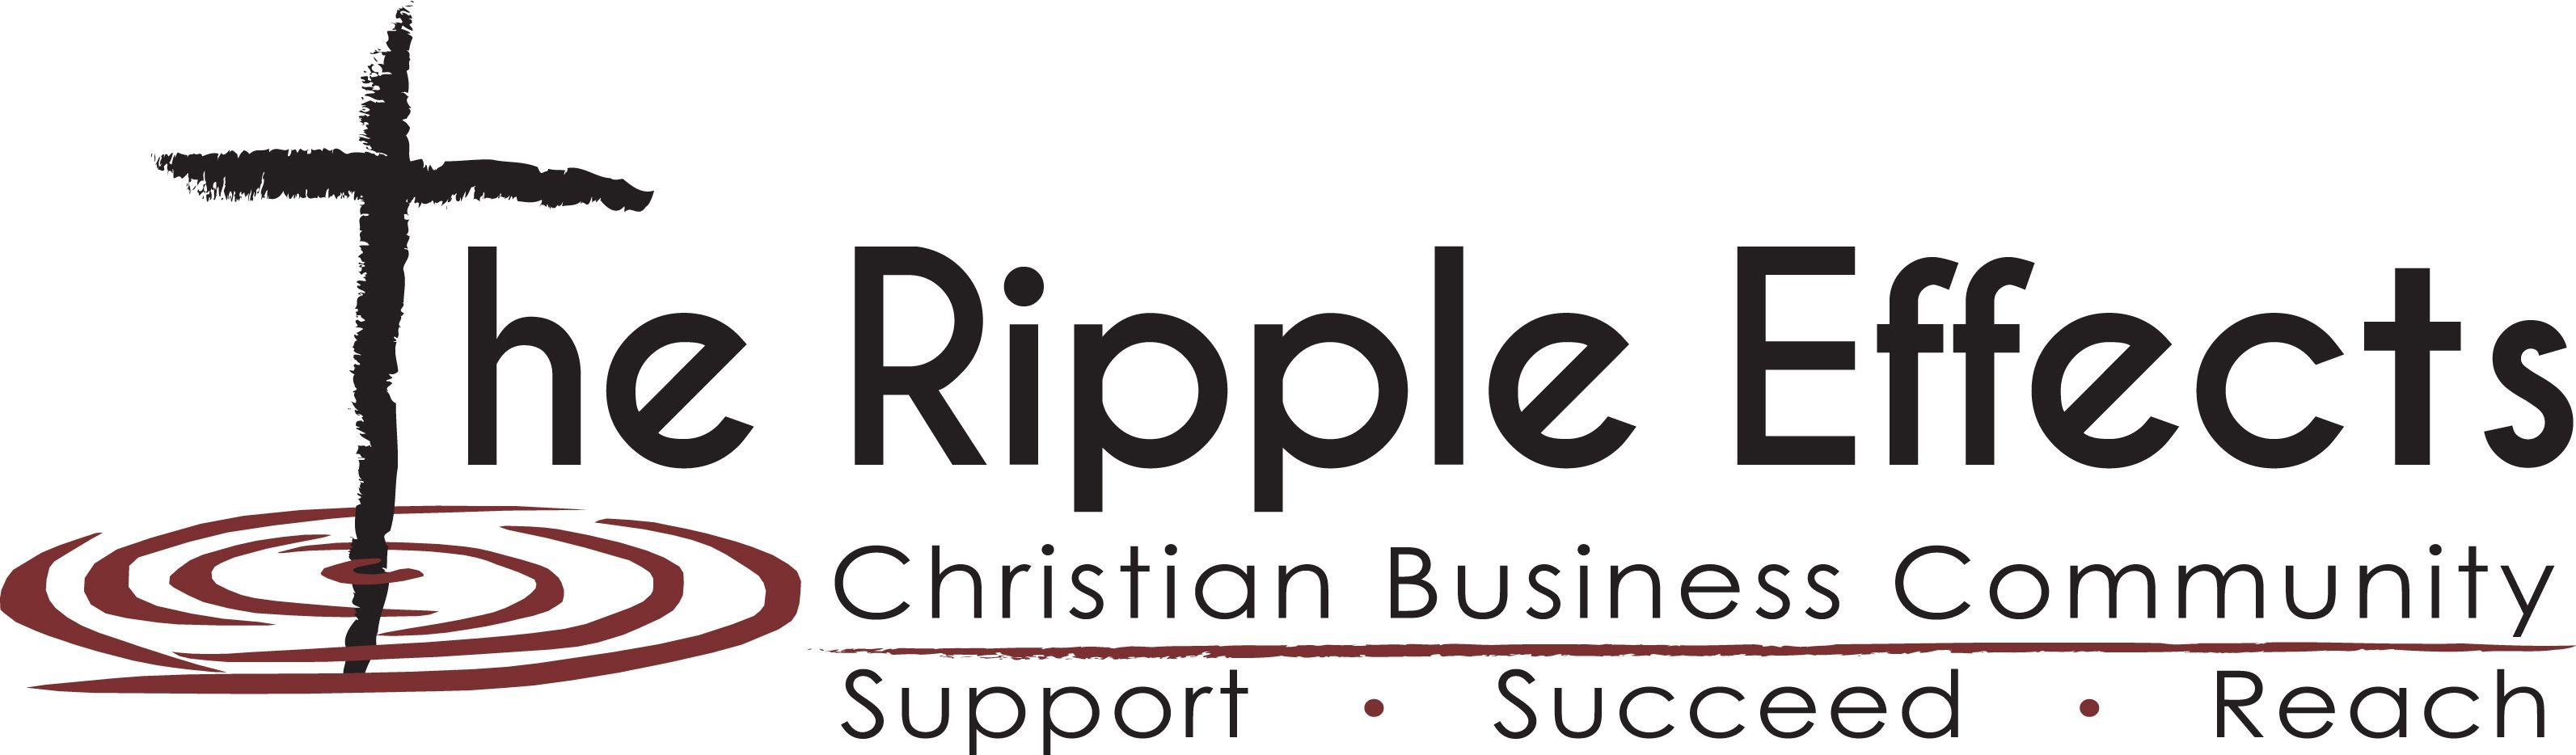 Christian Business Logo - The Ripple Effects ~ Christian Business Directory